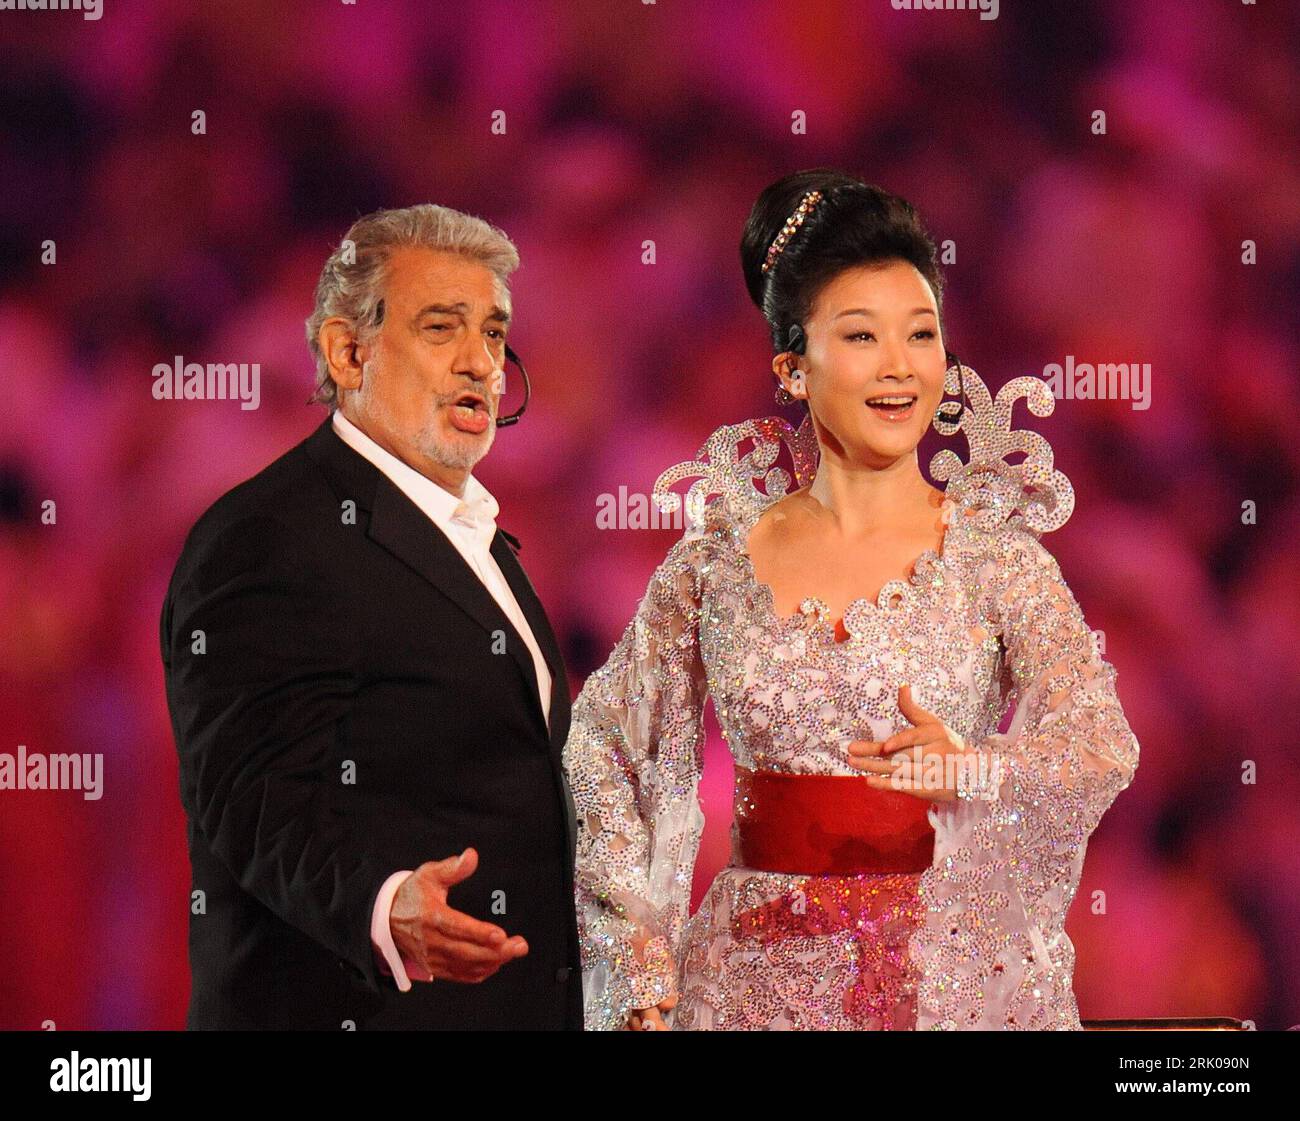 Placido domingo hi-res Page photography - - 13 images stock and Alamy